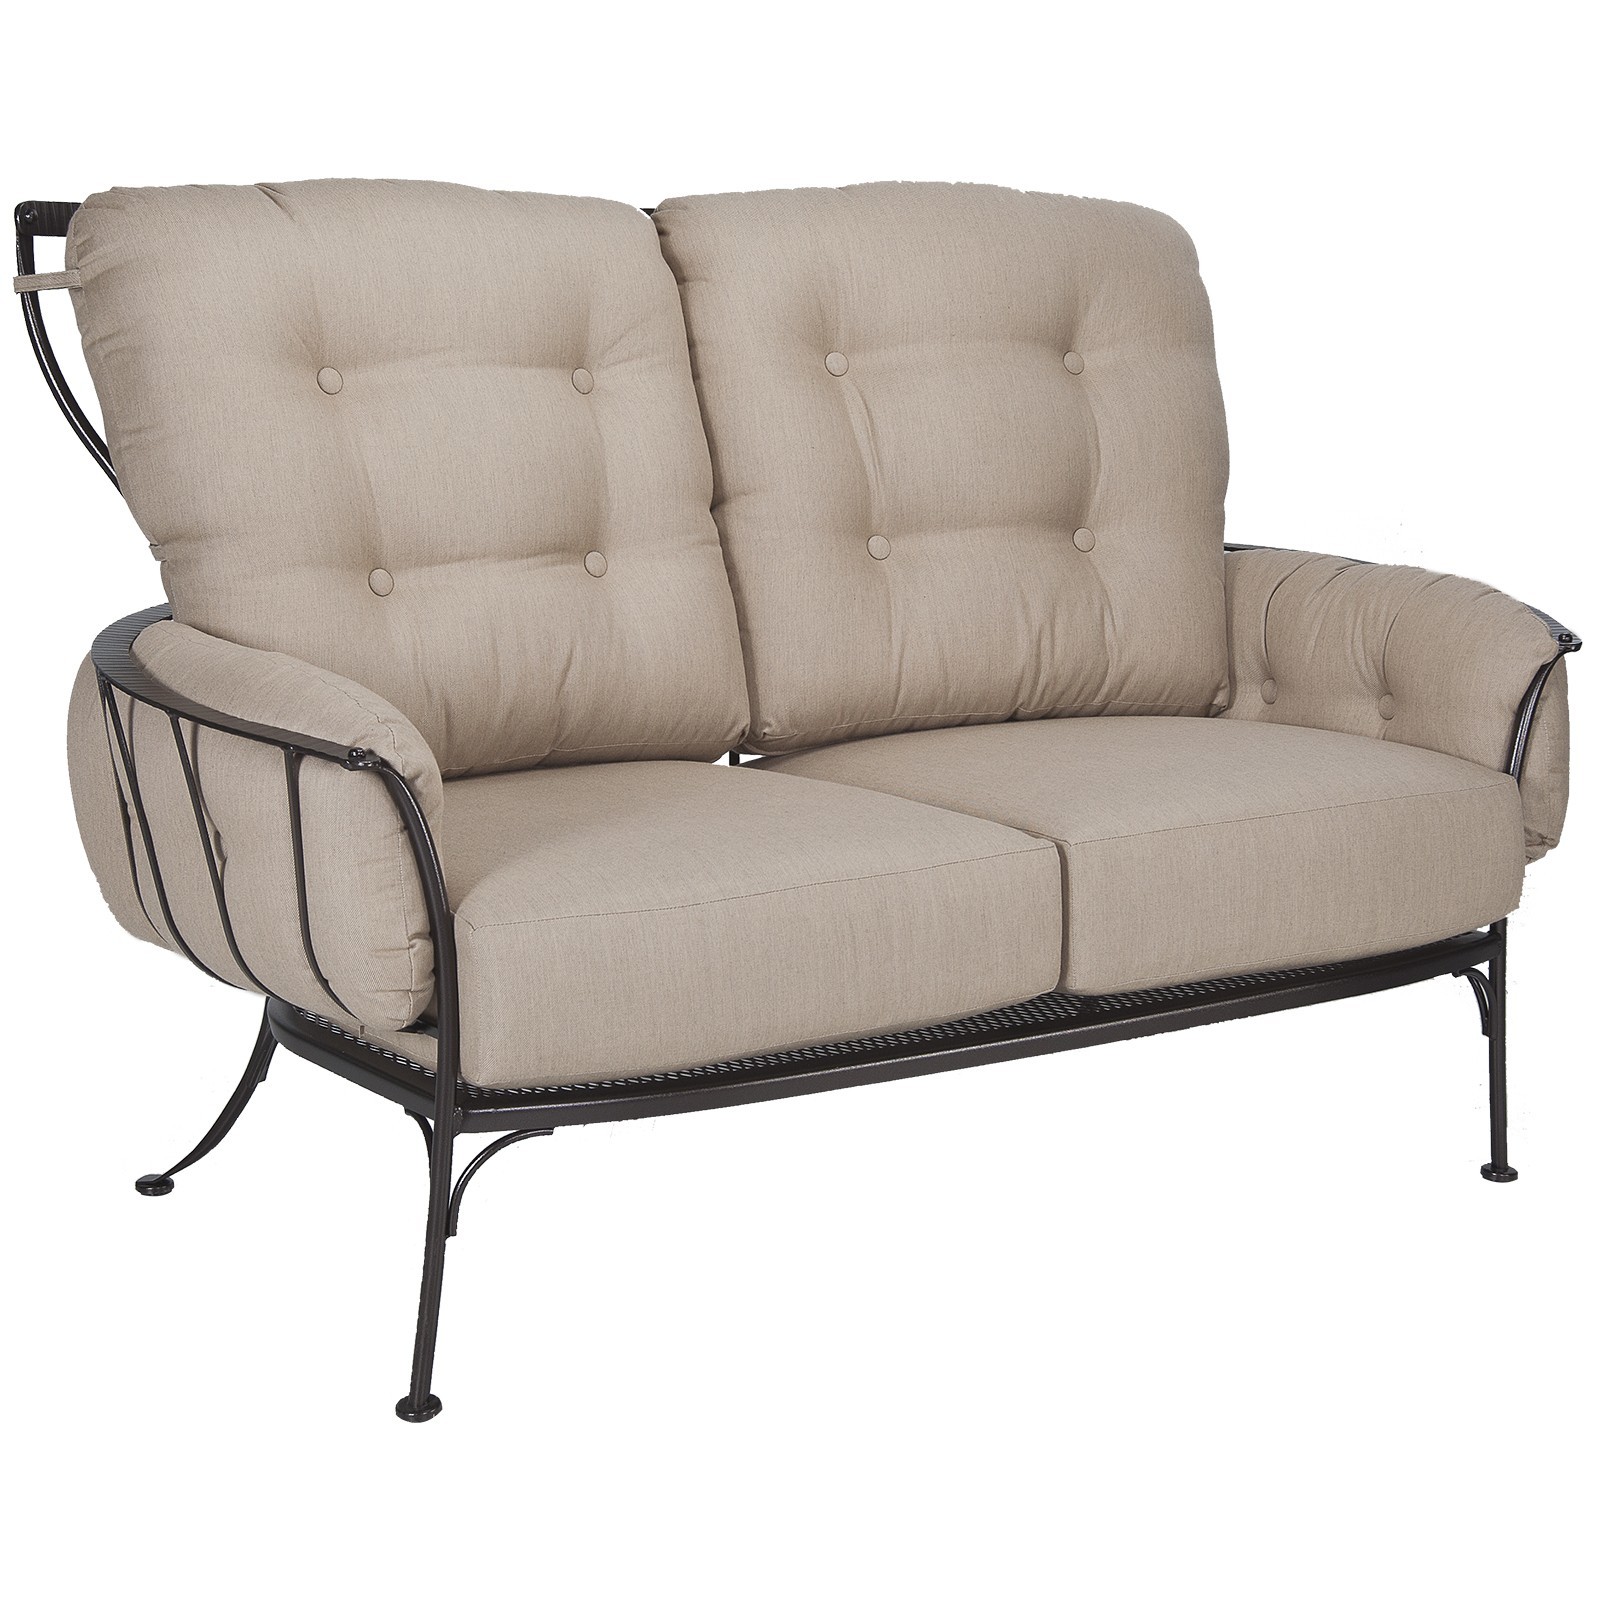 Monterra love seat luxury outdoor living by hausers patio